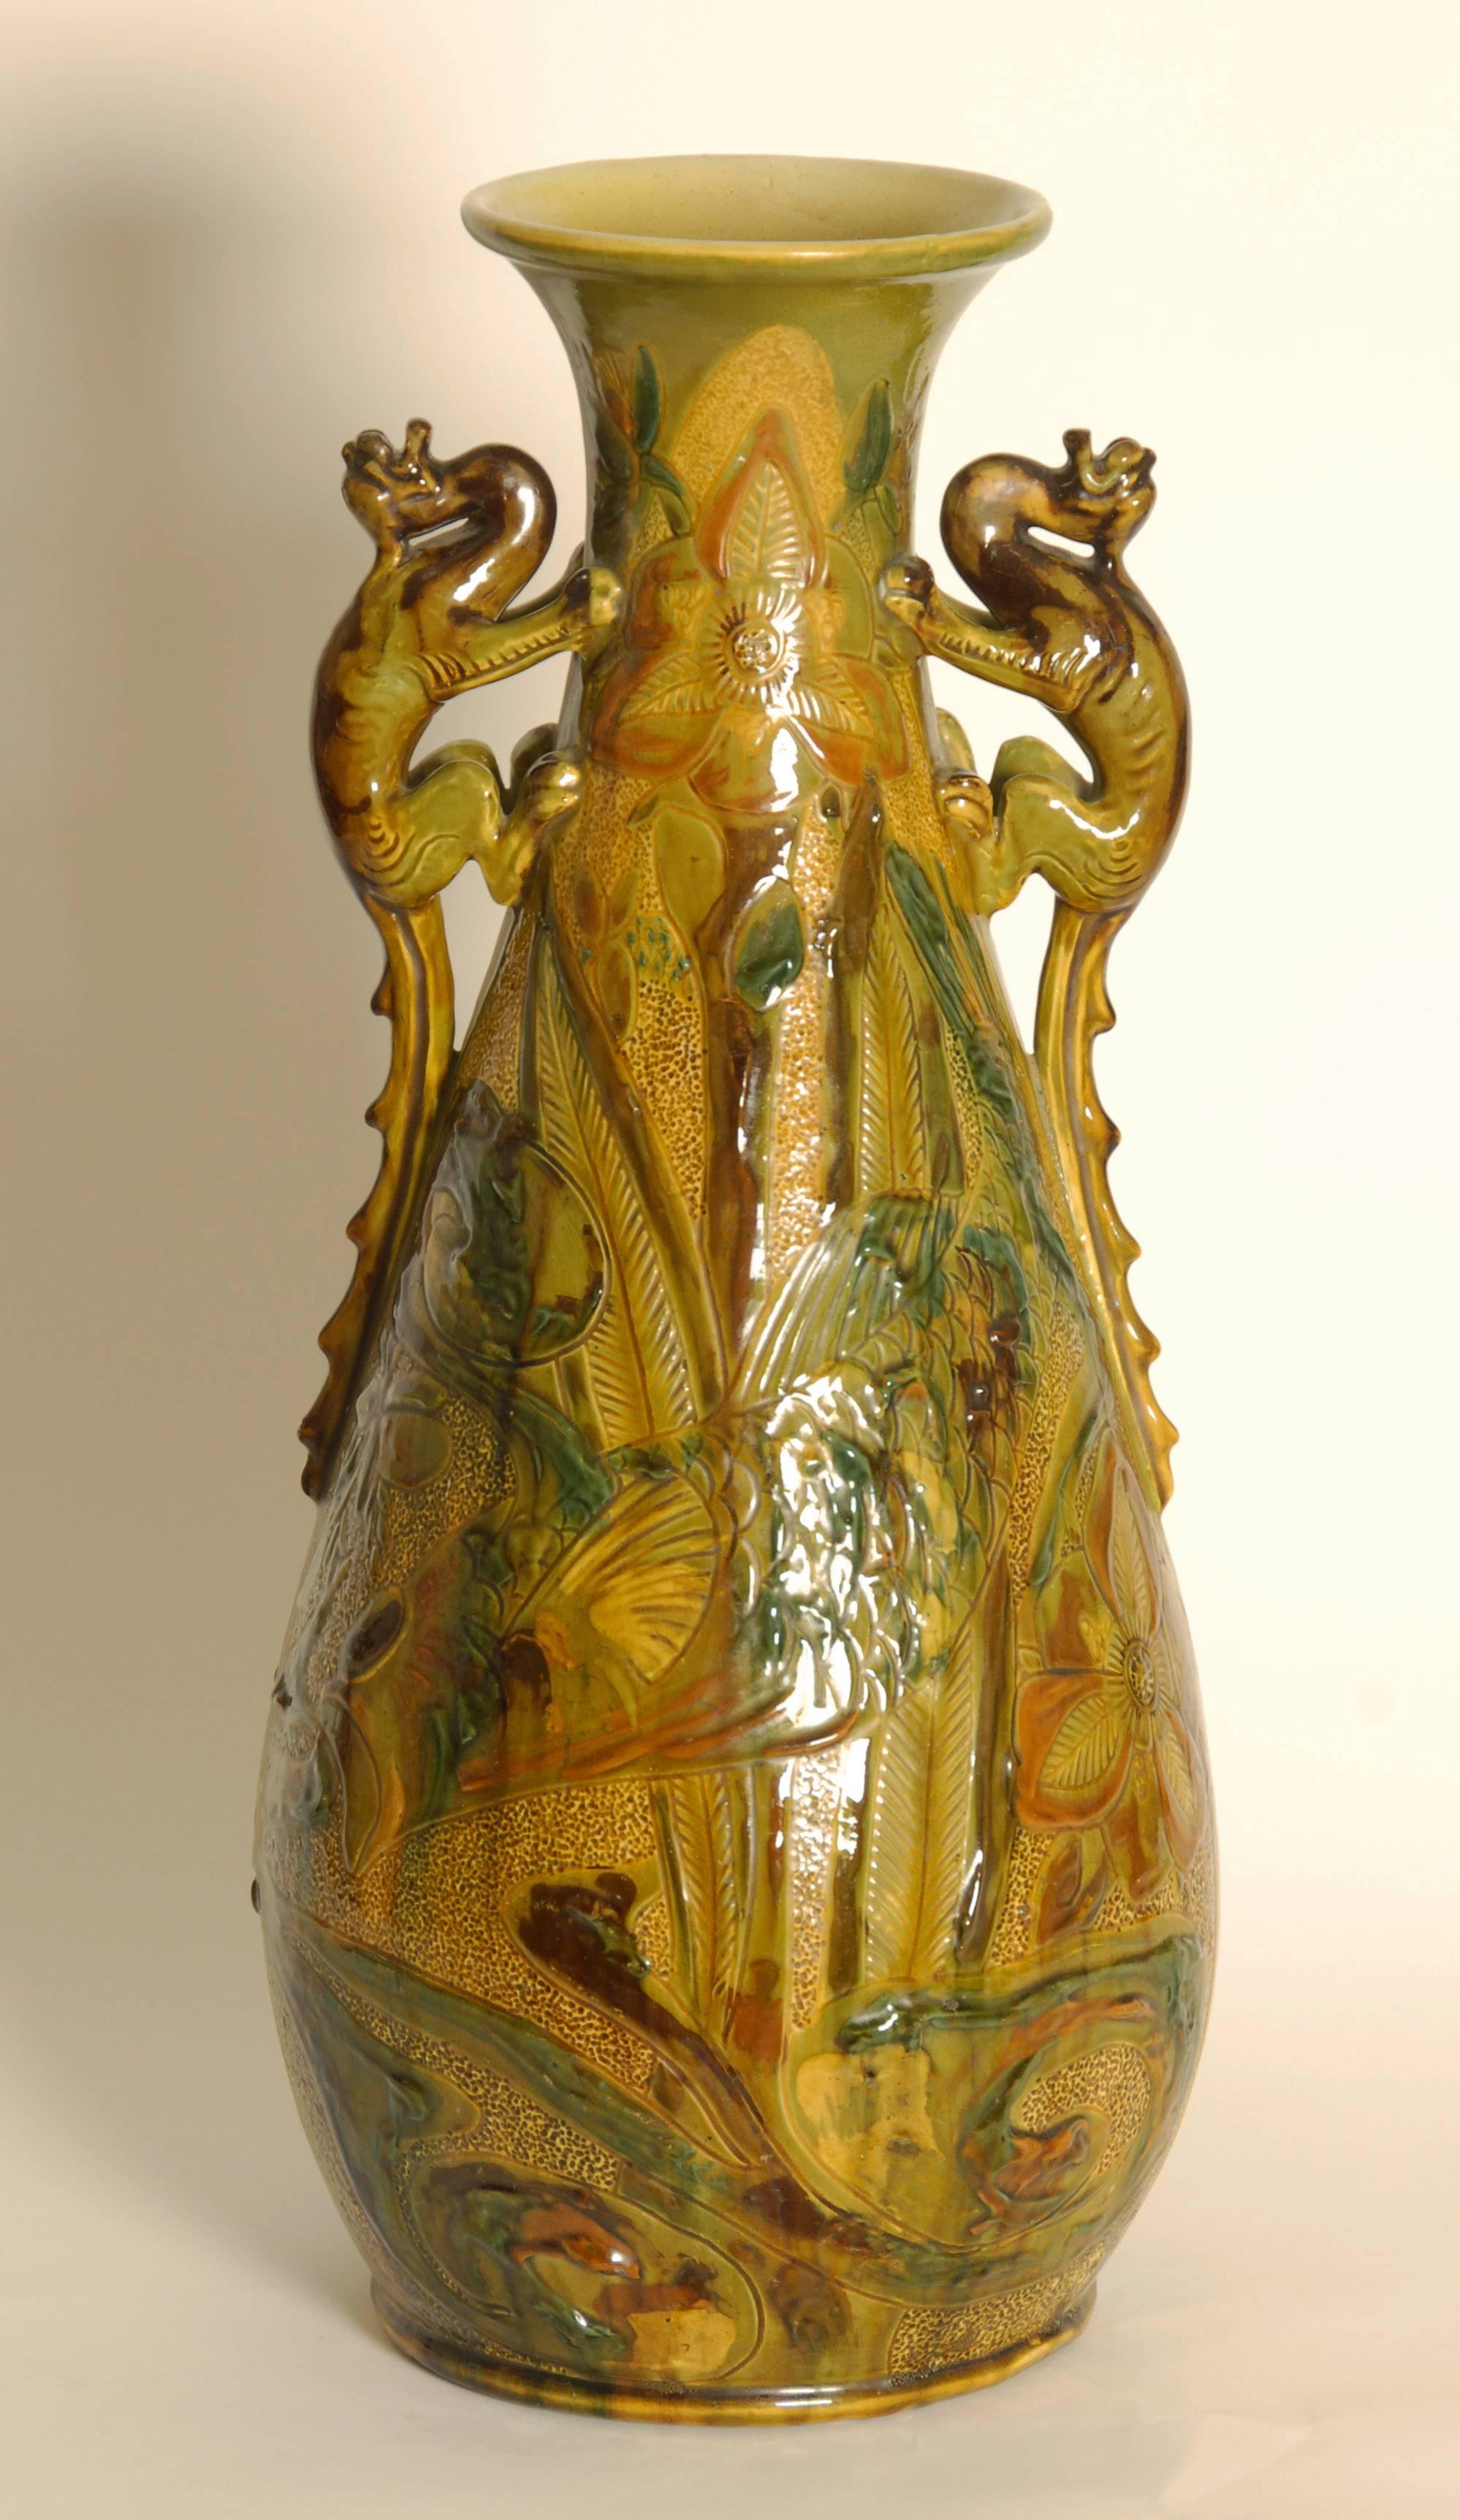 Large and impressive early 20th century Art Nouveau / Arts & Crafts lizard handle vase by C.H Brannam, designed by James Dewdney.
Signed and dated 1907.
Depicting naturalistic scenes of fish, reeds and flowers.
Price includes free shipping.